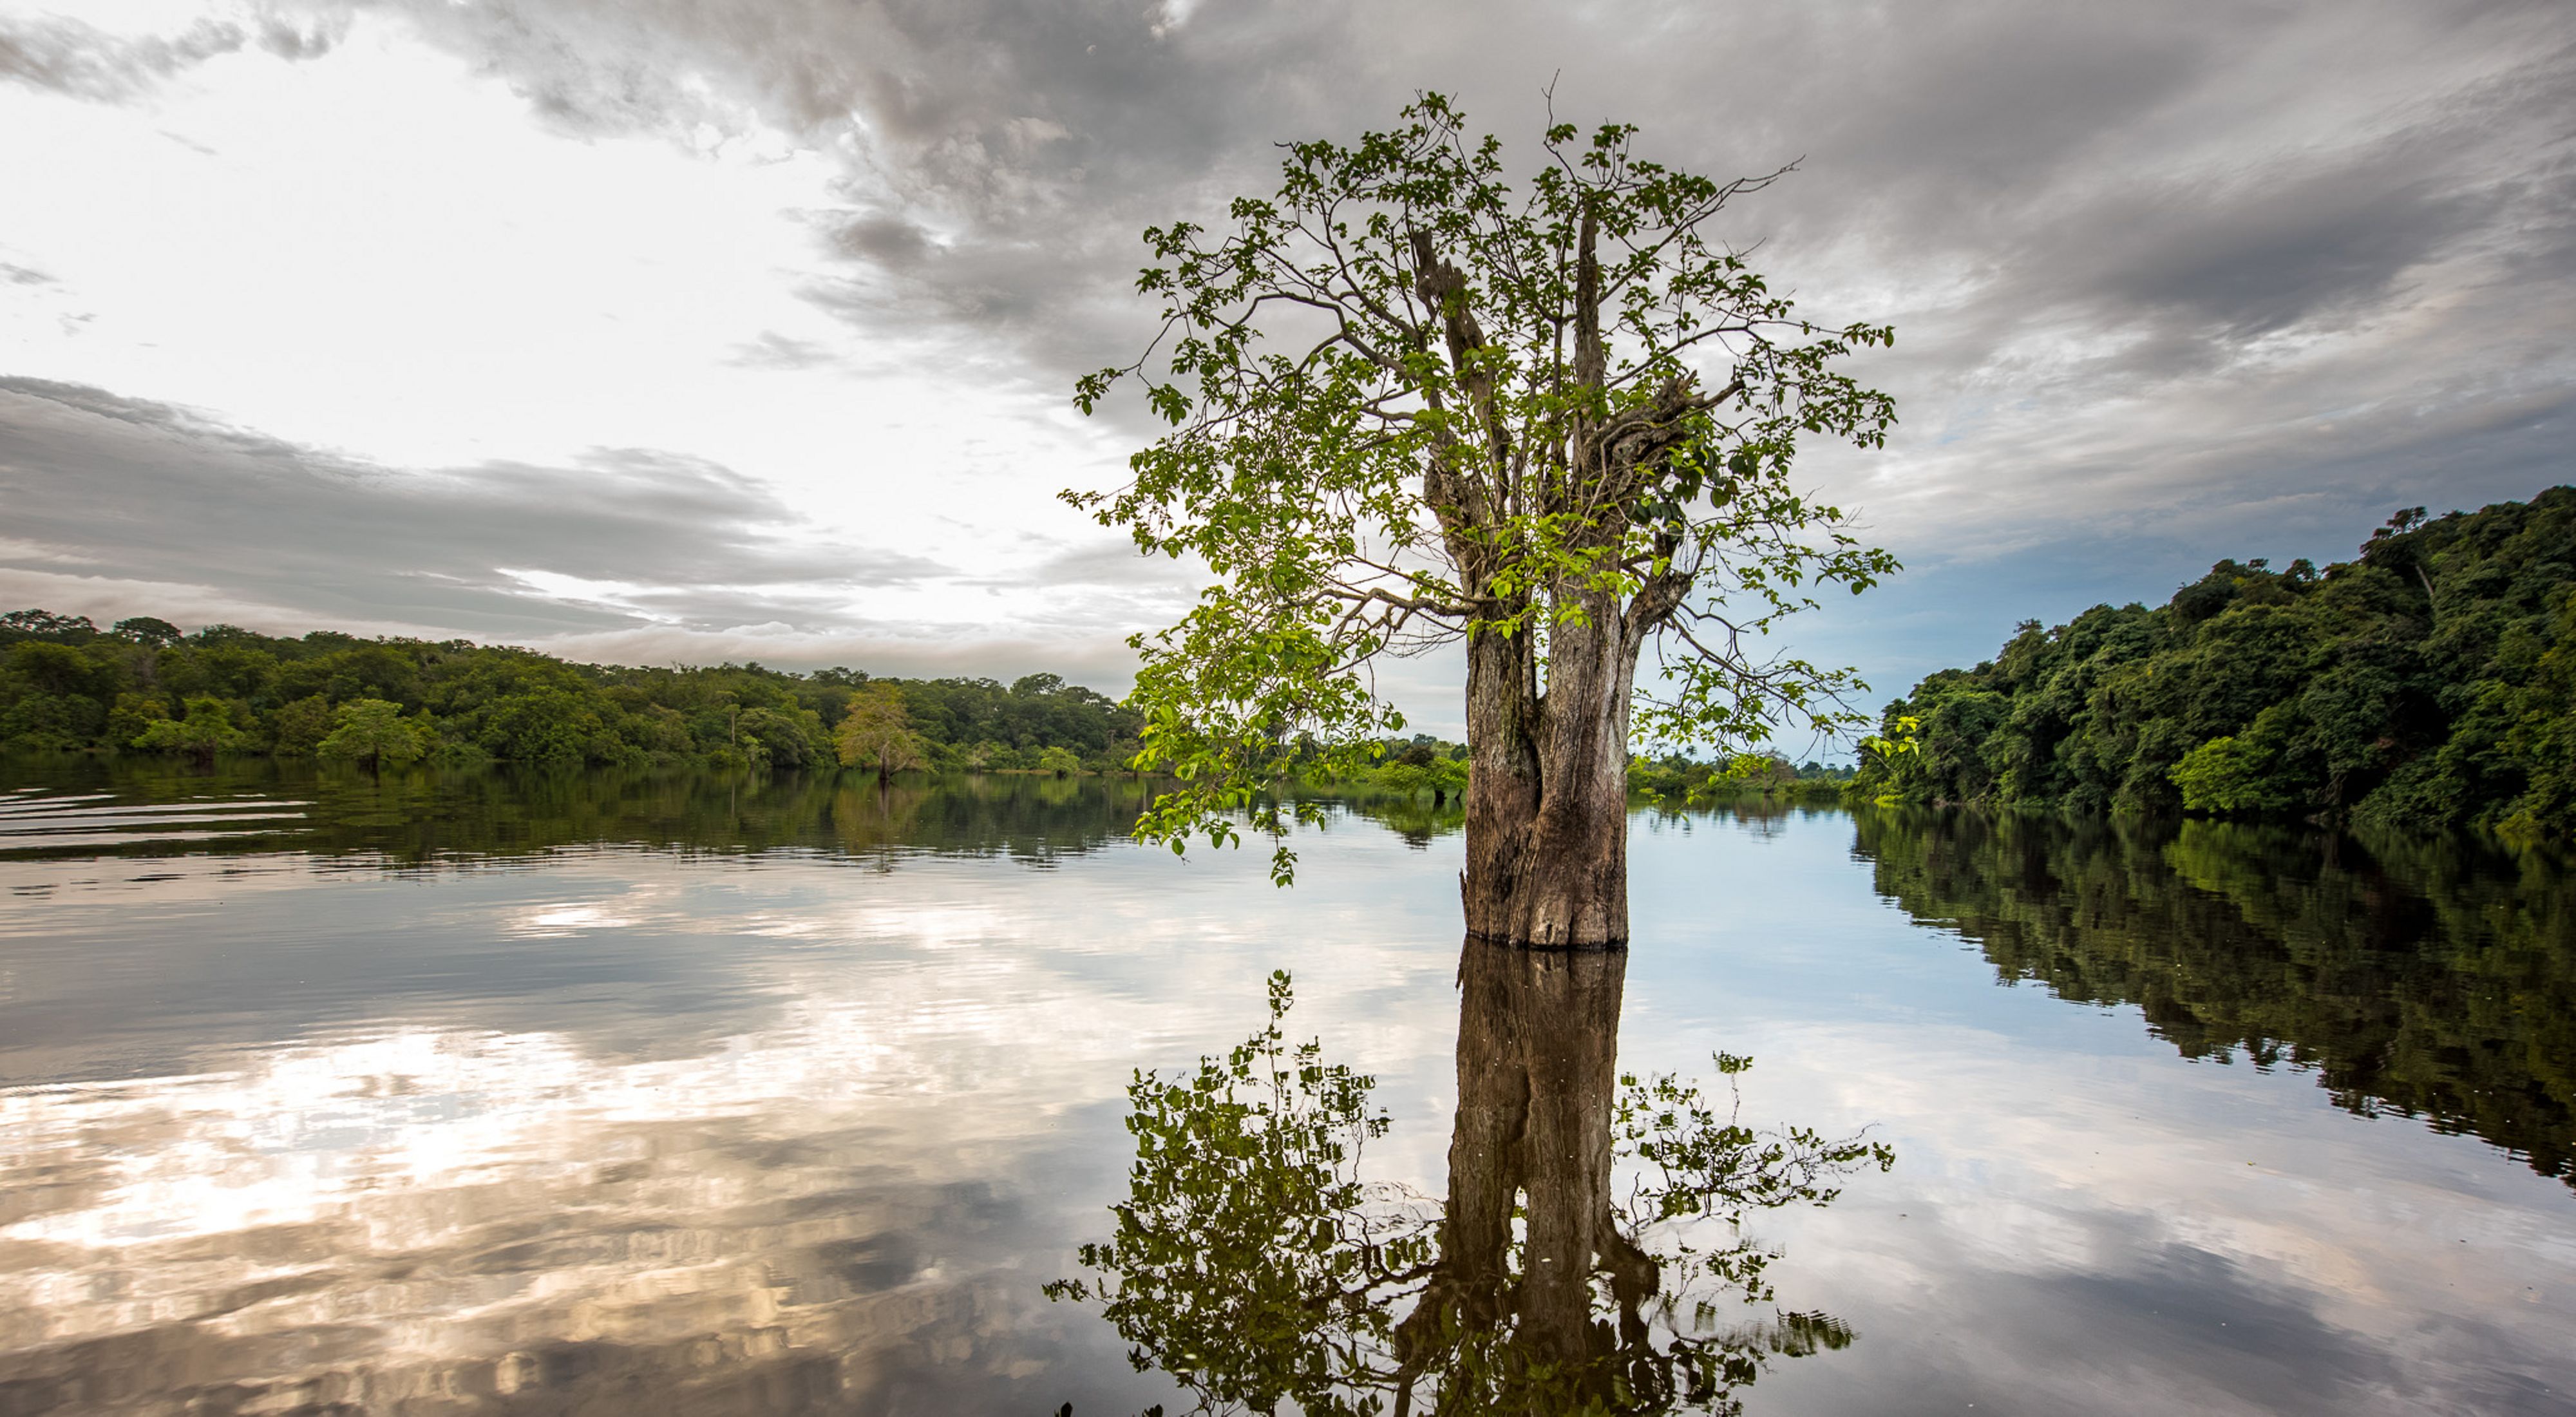 A tree and its reflection in a calm lake